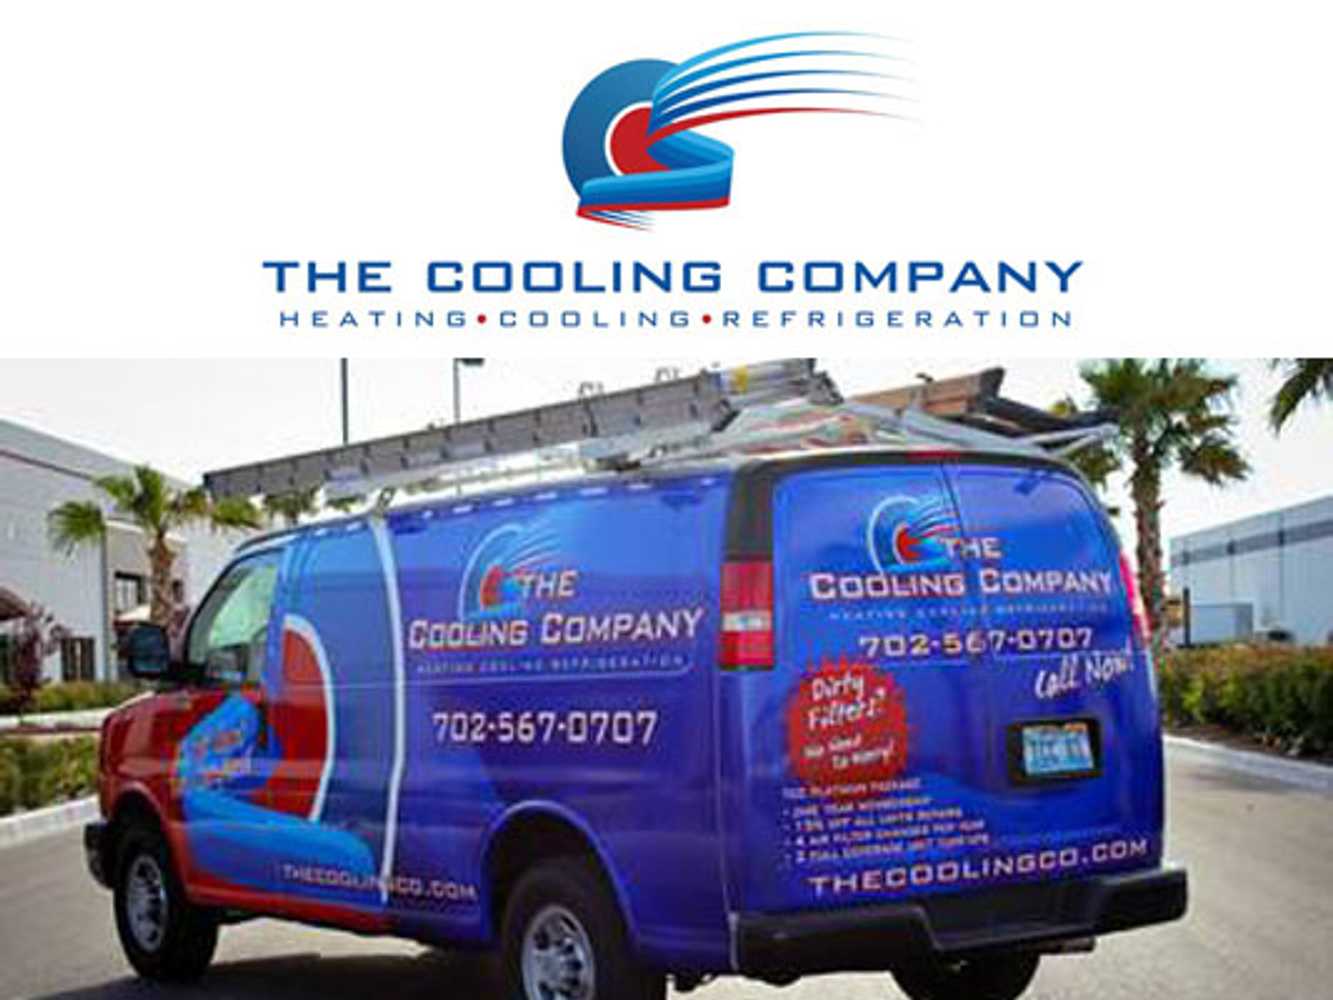 Photo(s) from The Cooling Company